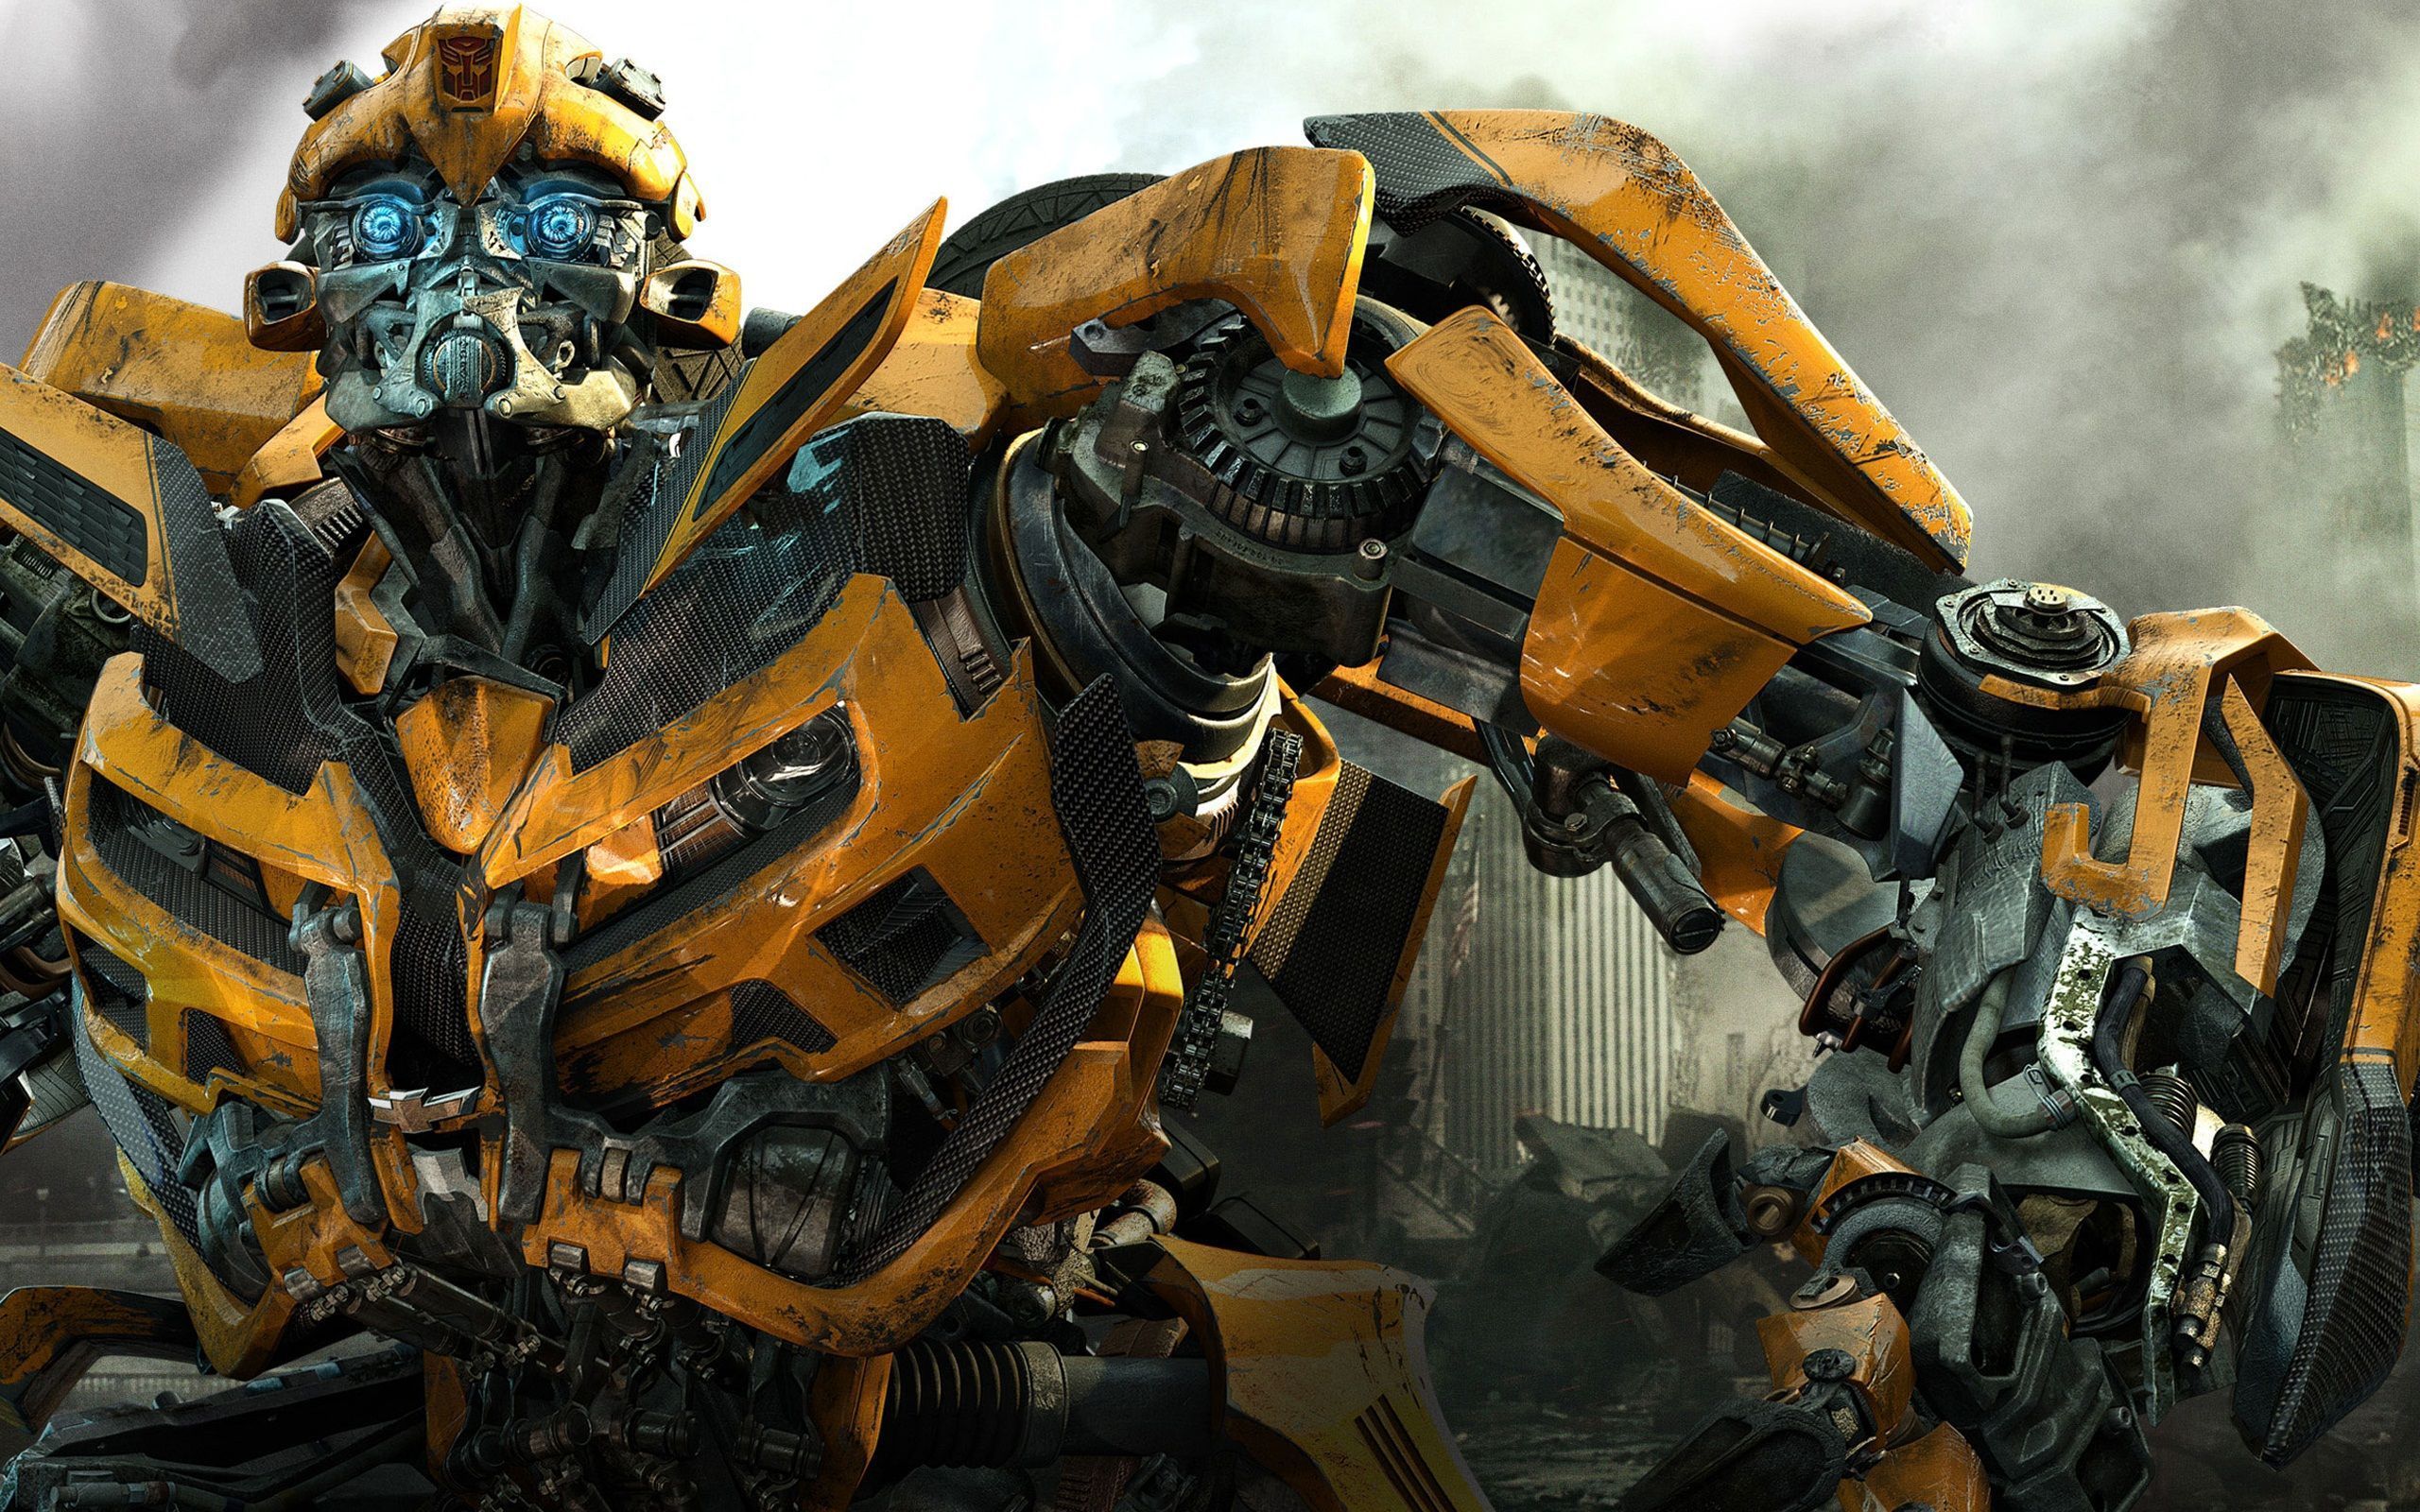 Wallpapers Tagged With BUMBLEBEE | BUMBLEBEE HD Wallpapers | Page 1